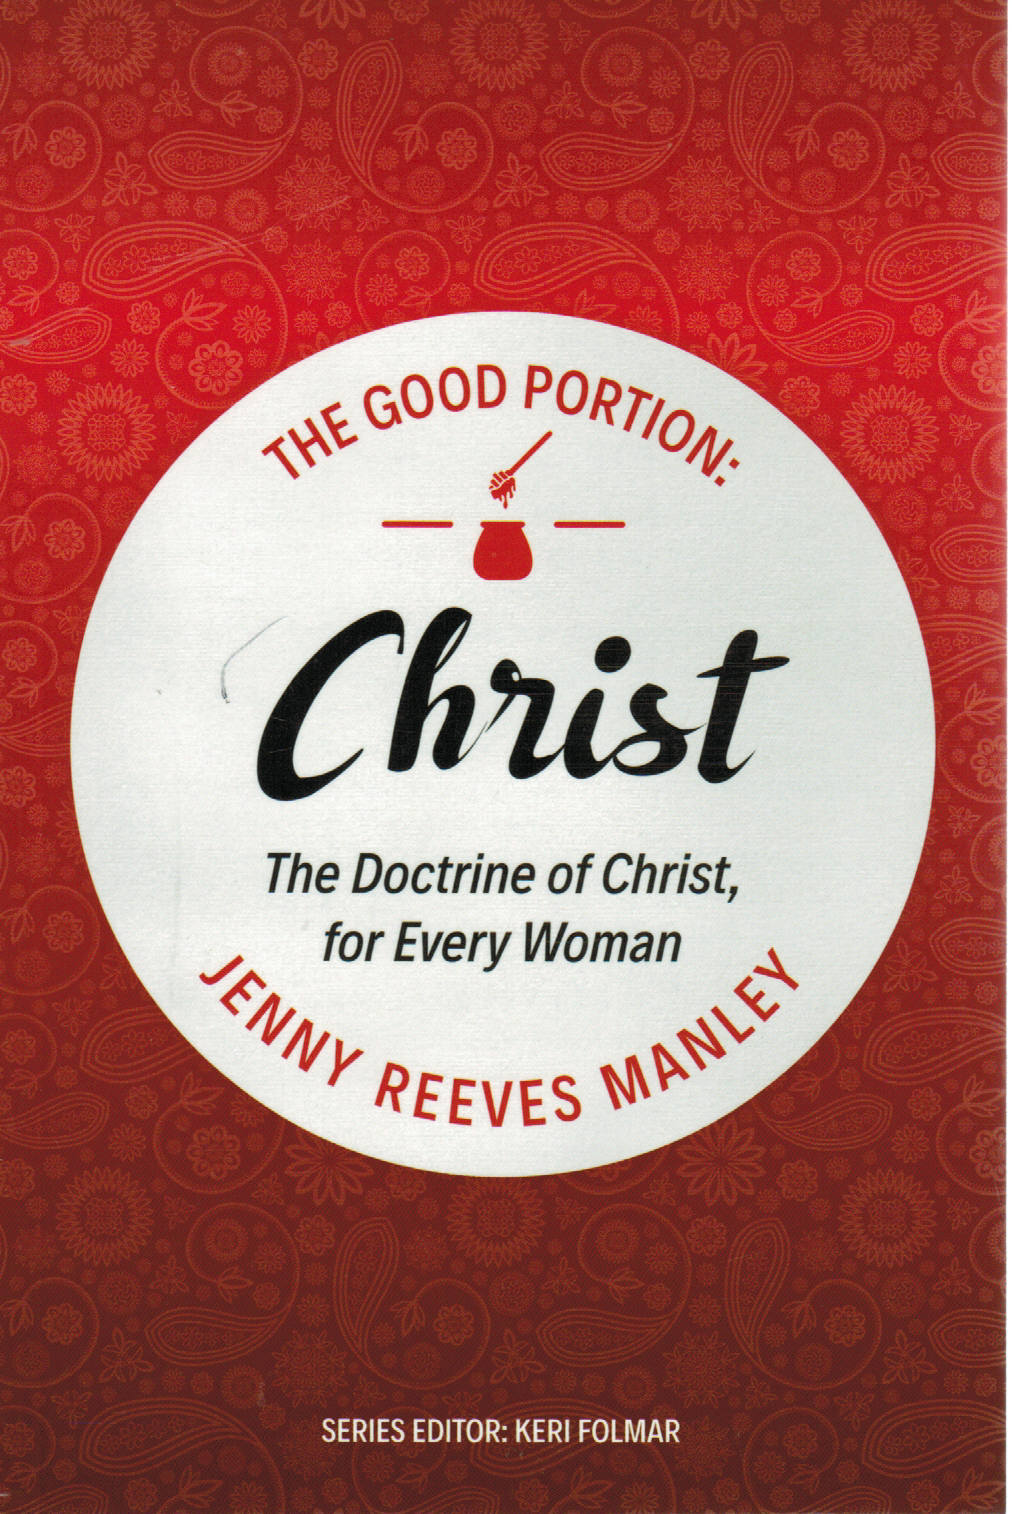 The Good Portion - Christ: The Doctrine of Christ, for Every Woman